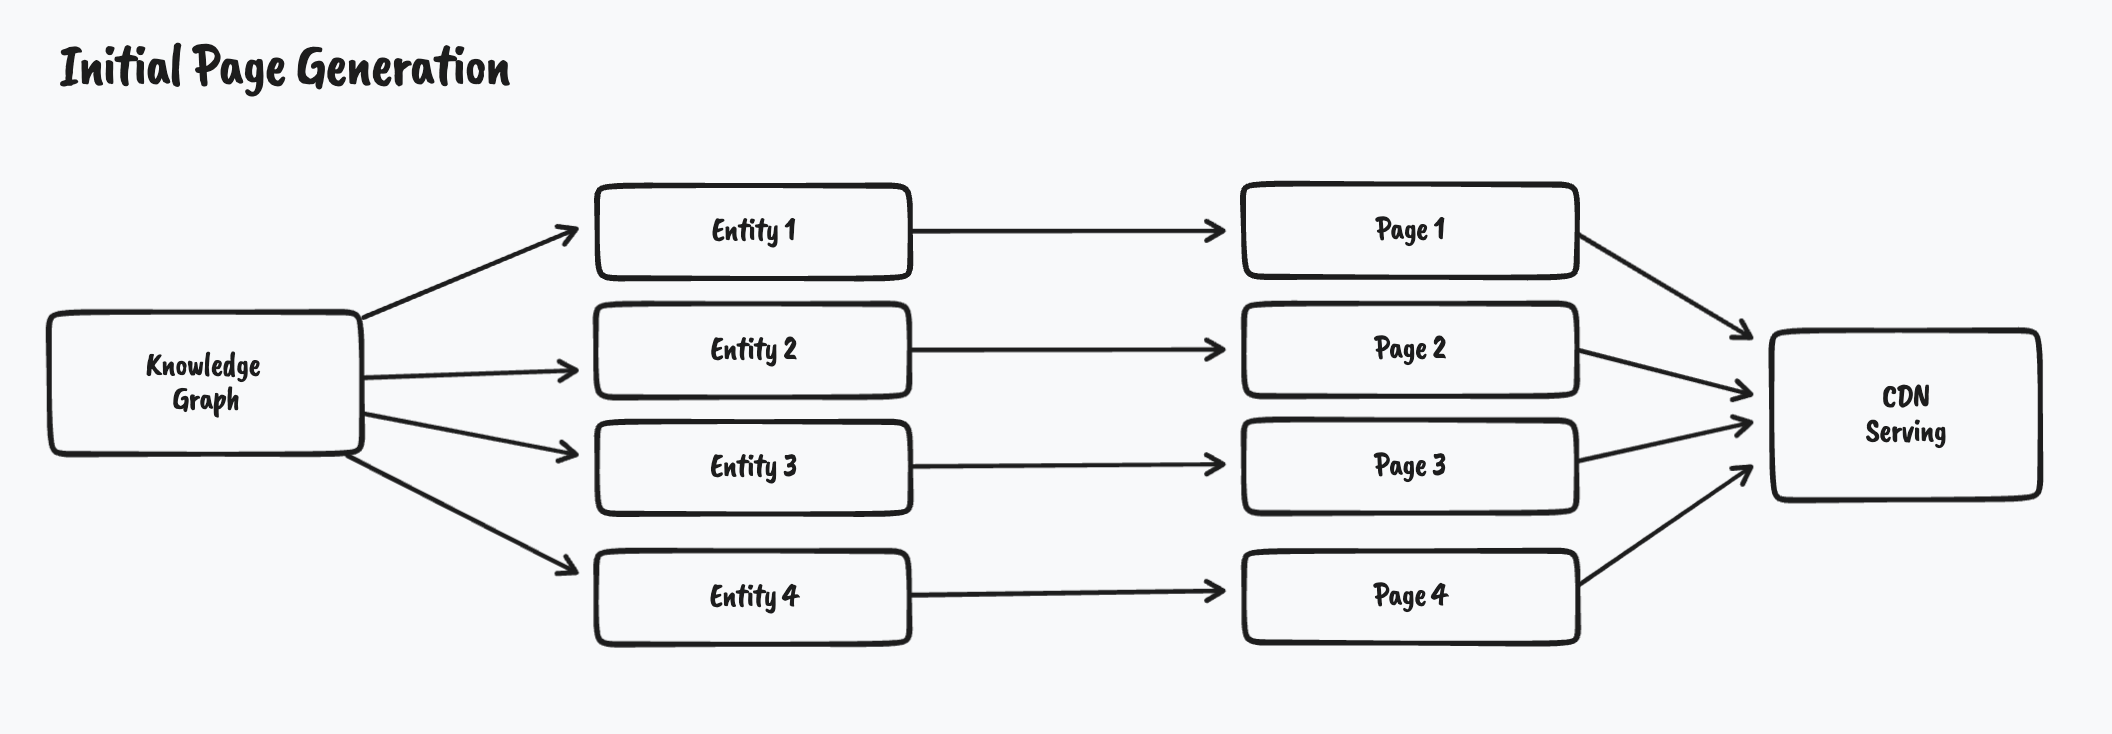 deploy initial page generation process